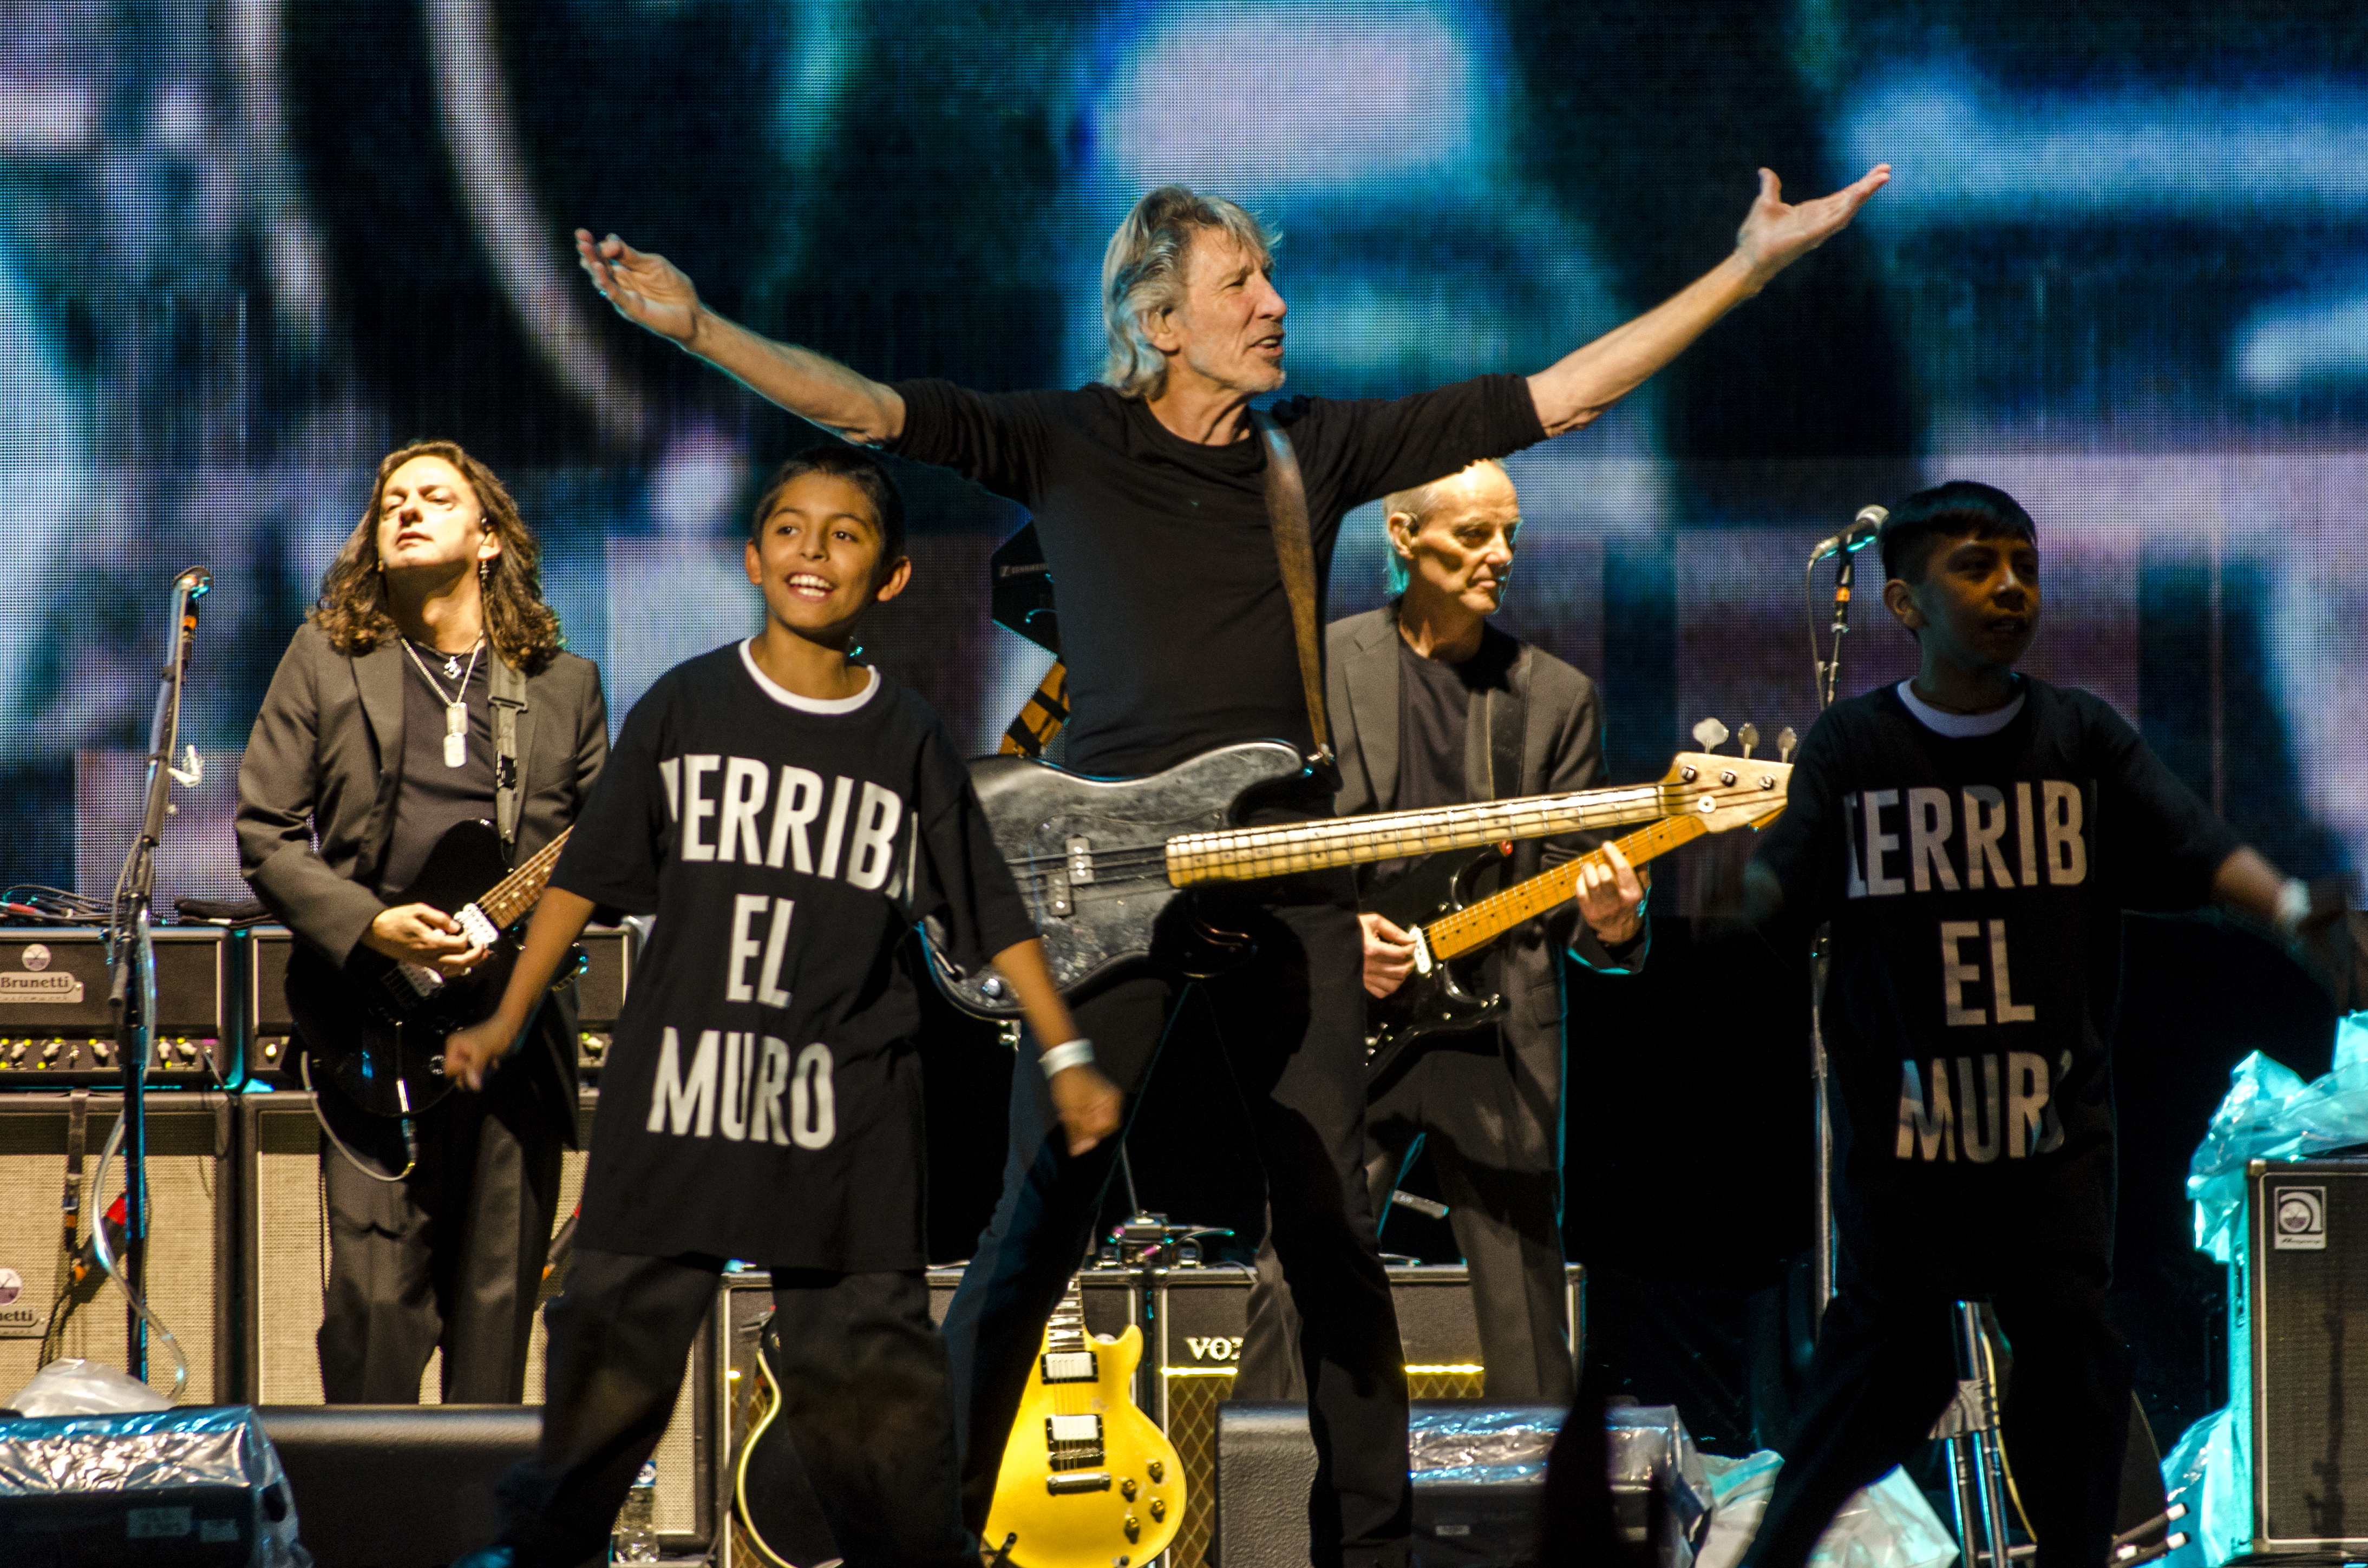 roger-waters-zocalo-01-10-16-67